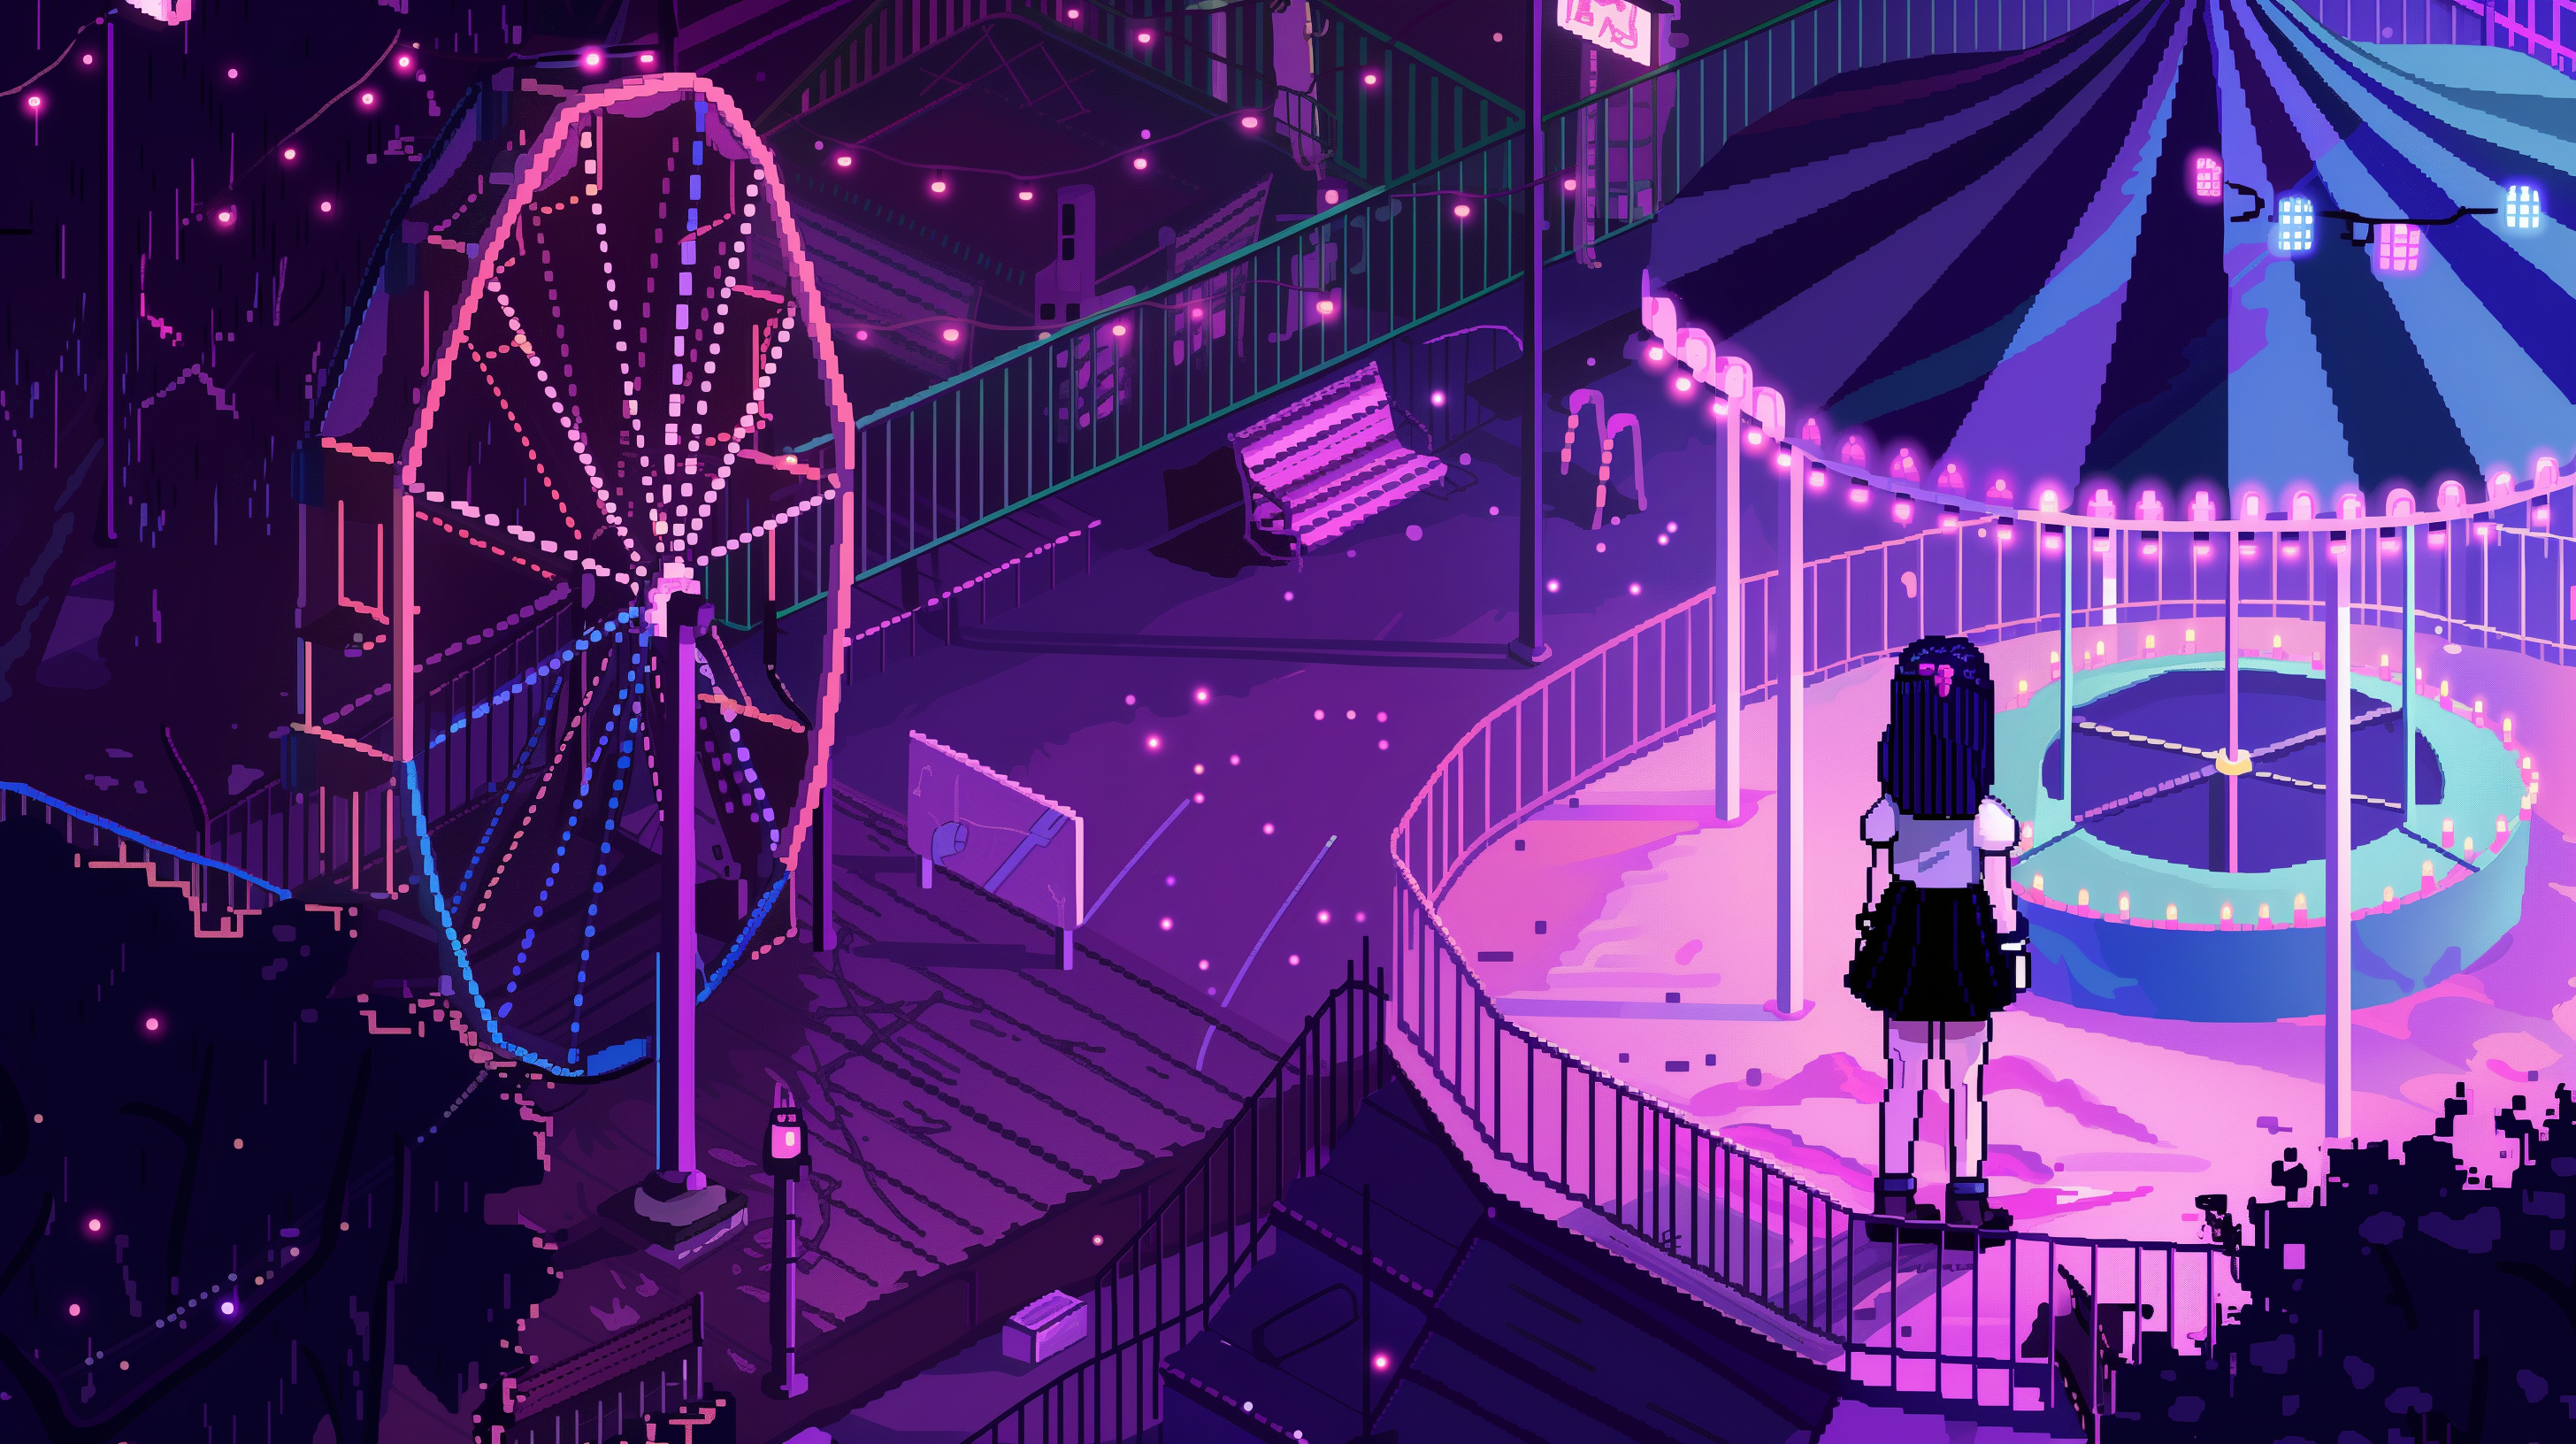 HD wallpaper of an 8-bit, isometric lo-fi image featuring a person observing a purple-themed amusement park with a Ferris wheel and merry-go-round at night.